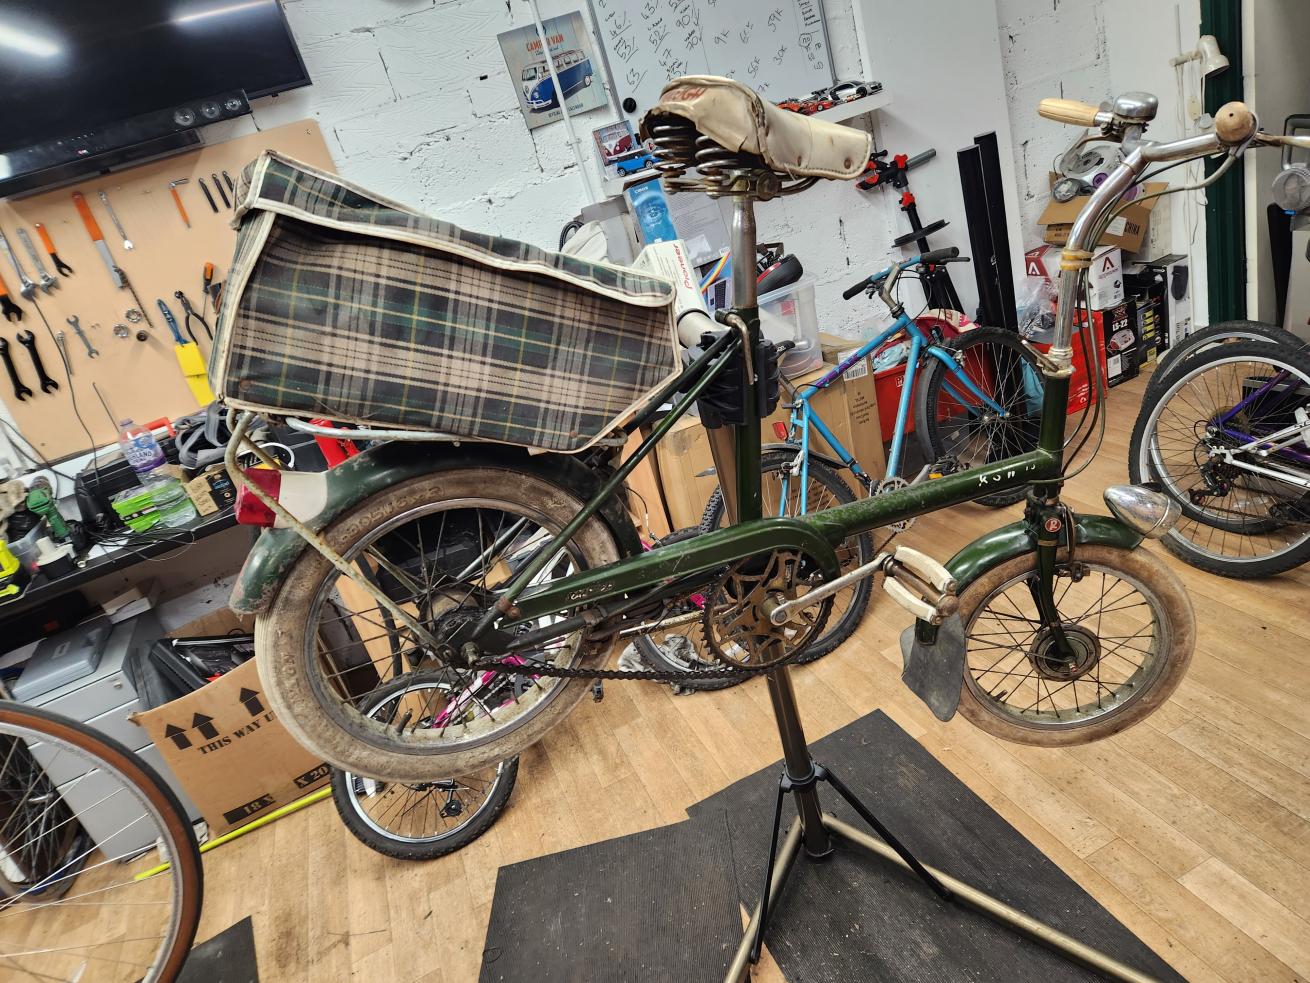 A bike with a tartan carry case suspended on a stand inside a workshop surrounded by tools